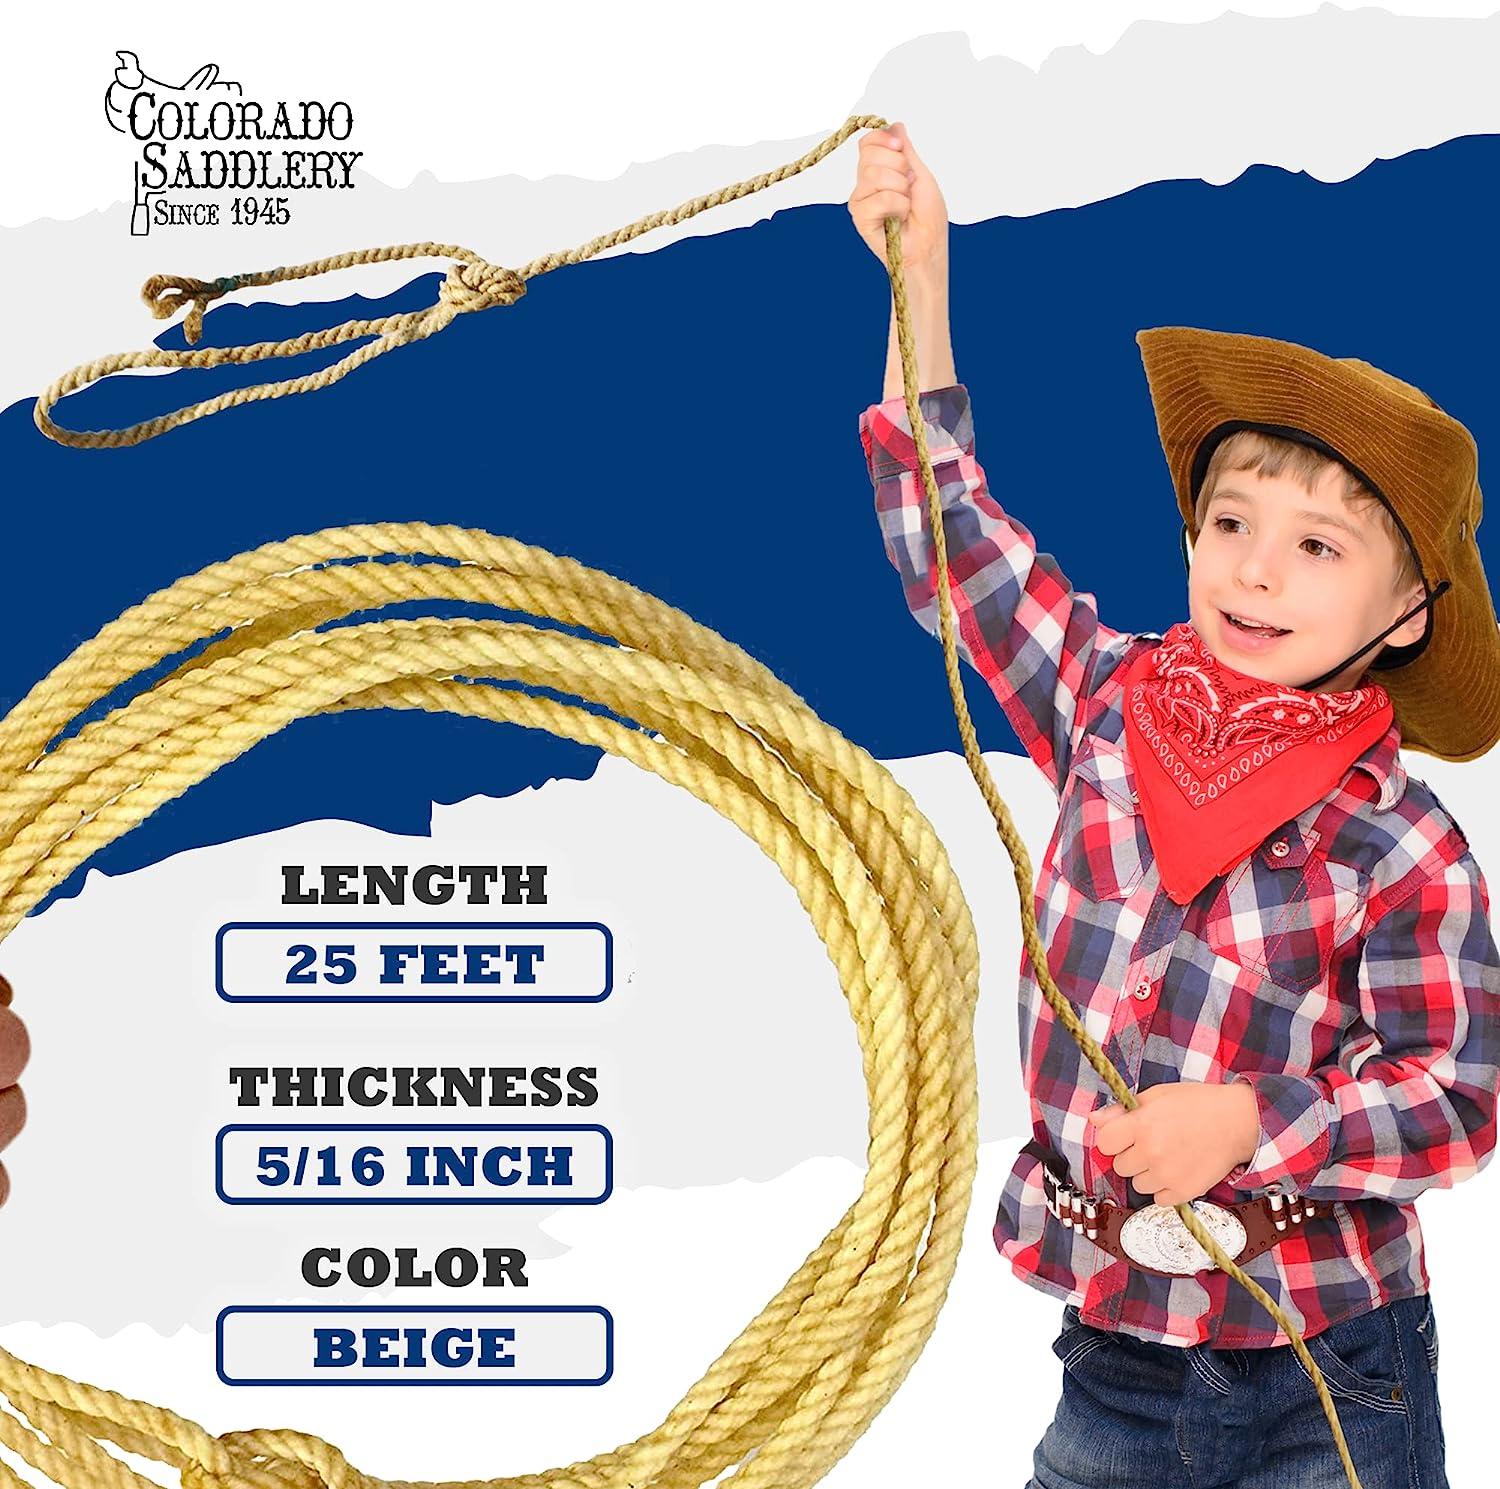  Colorado Saddlery Kid's Silver Dot Rope Authentic Tough  Durable Cowboy Rope Made Smaller for Youth Hands Great Practice Lasso Rope  Kids Rope for Roping Dummy : Sports & Outdoors